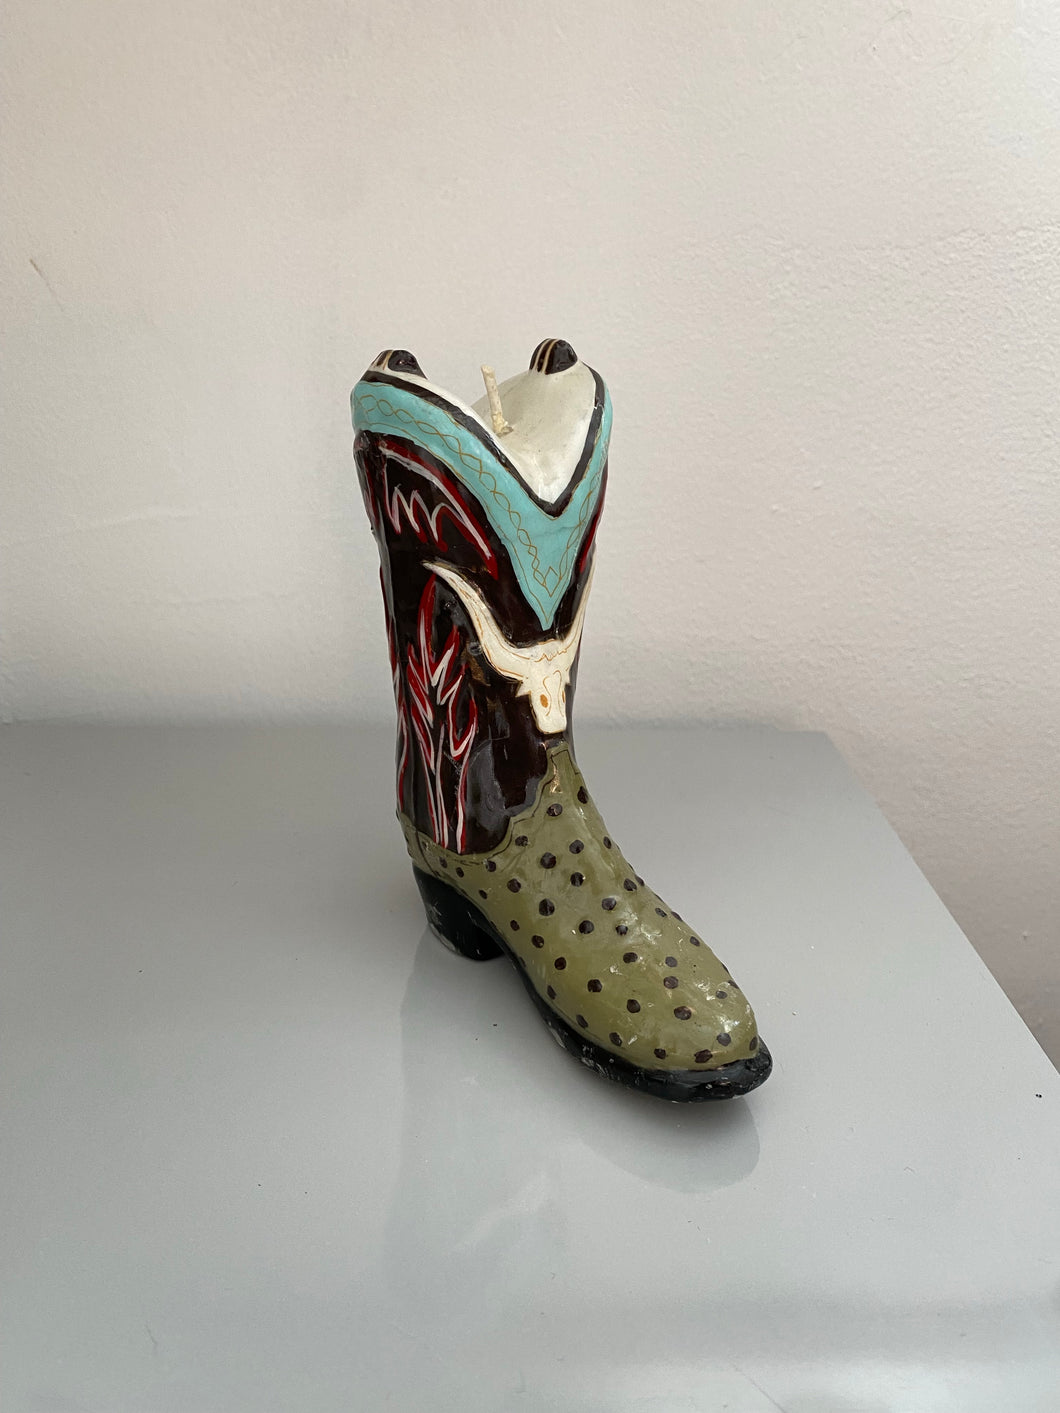 Cowboy Boot Candle